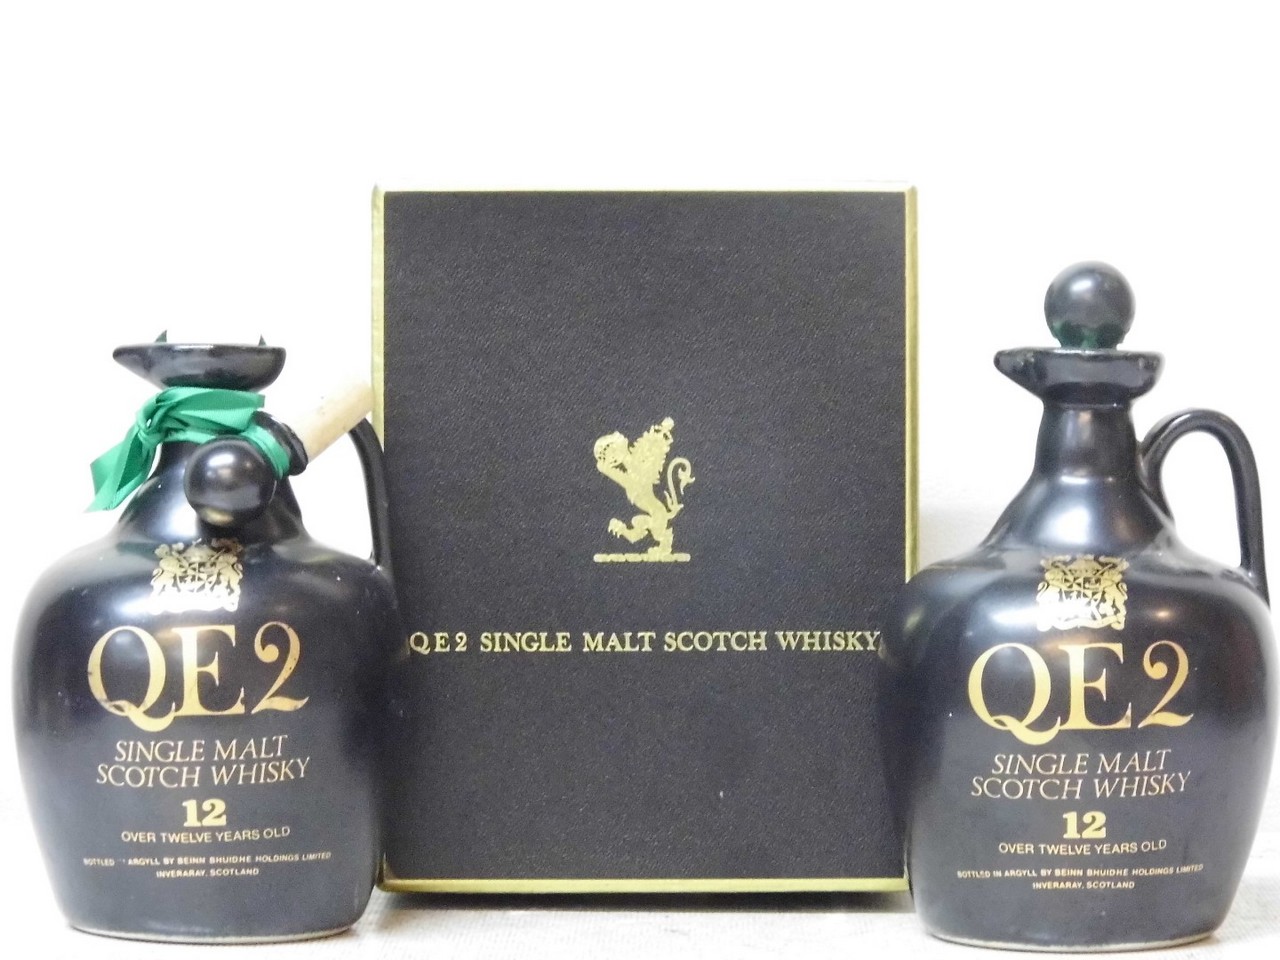 QE2 Single Malt Whisky Over 12 Years OldCeramic DecanterNo Size or Strength Stated1 bt Original